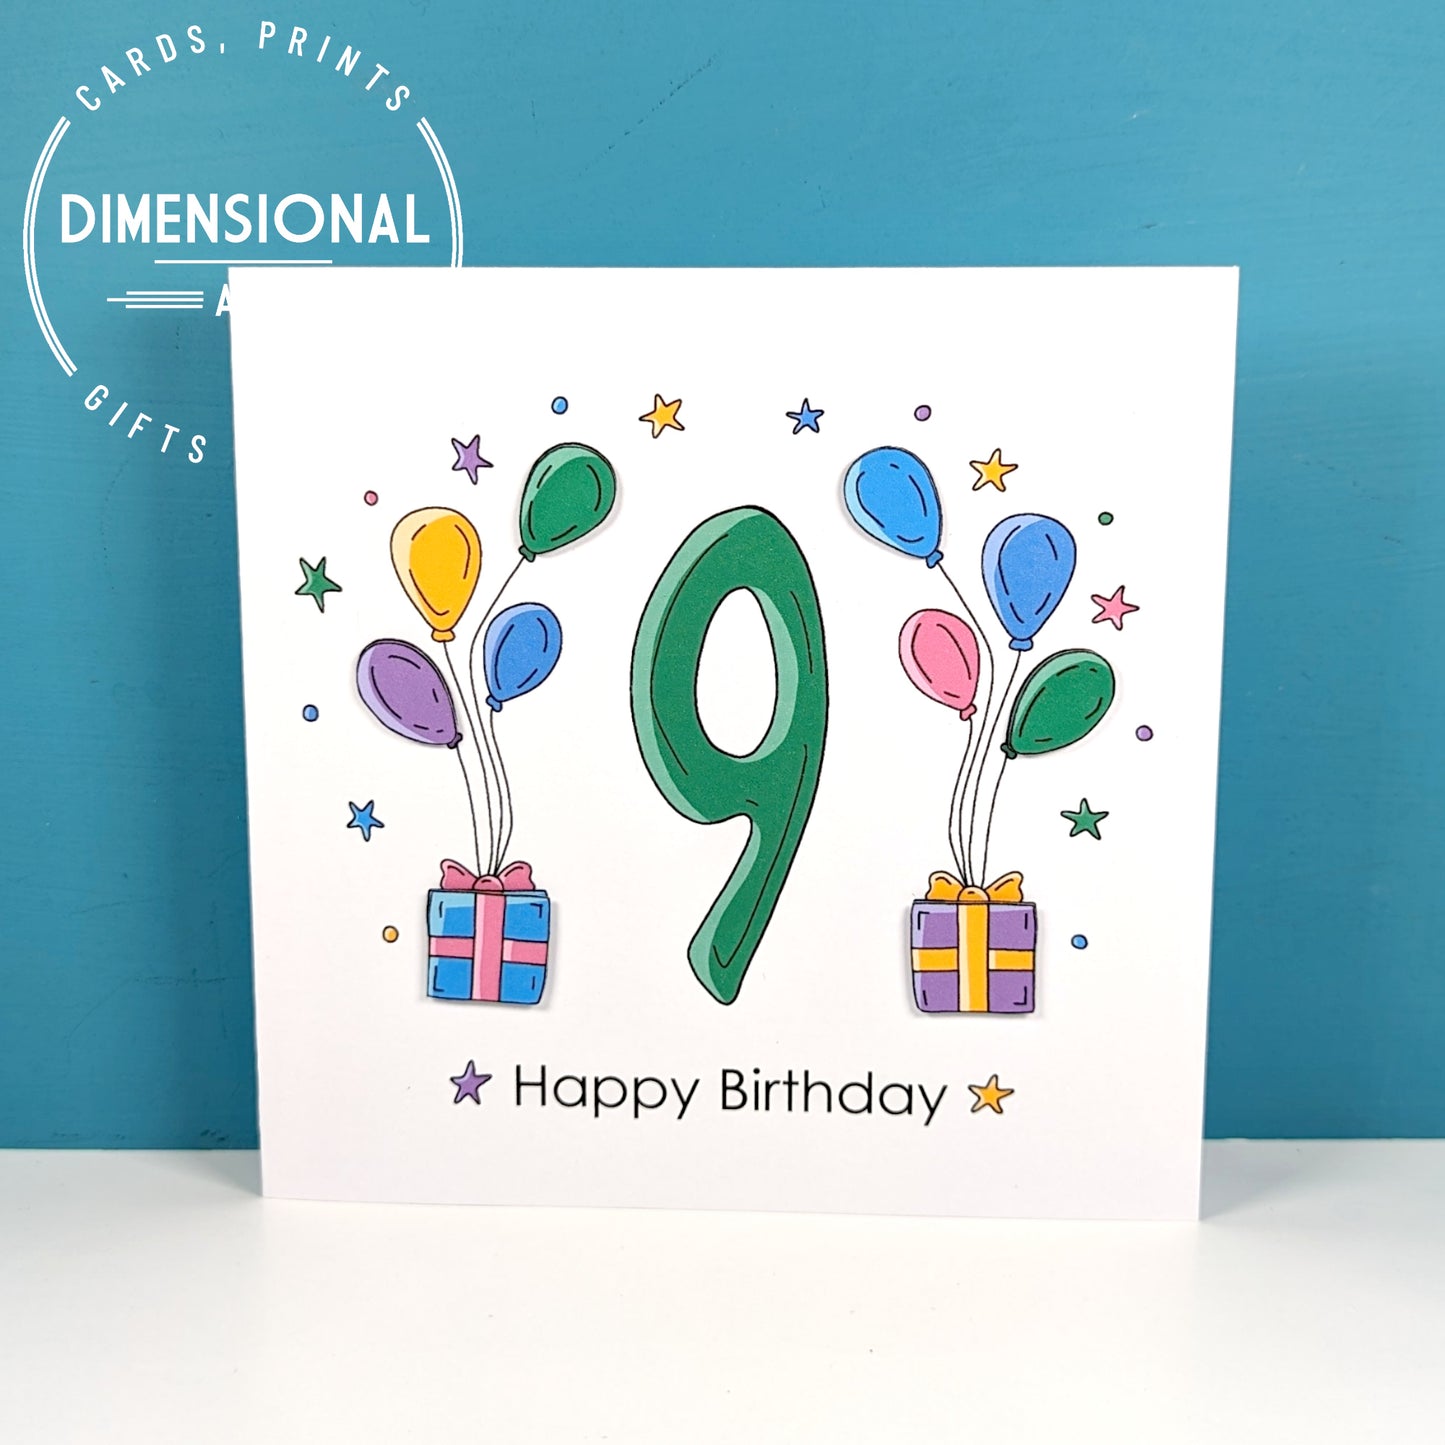 9th balloons and presents Birthday Card